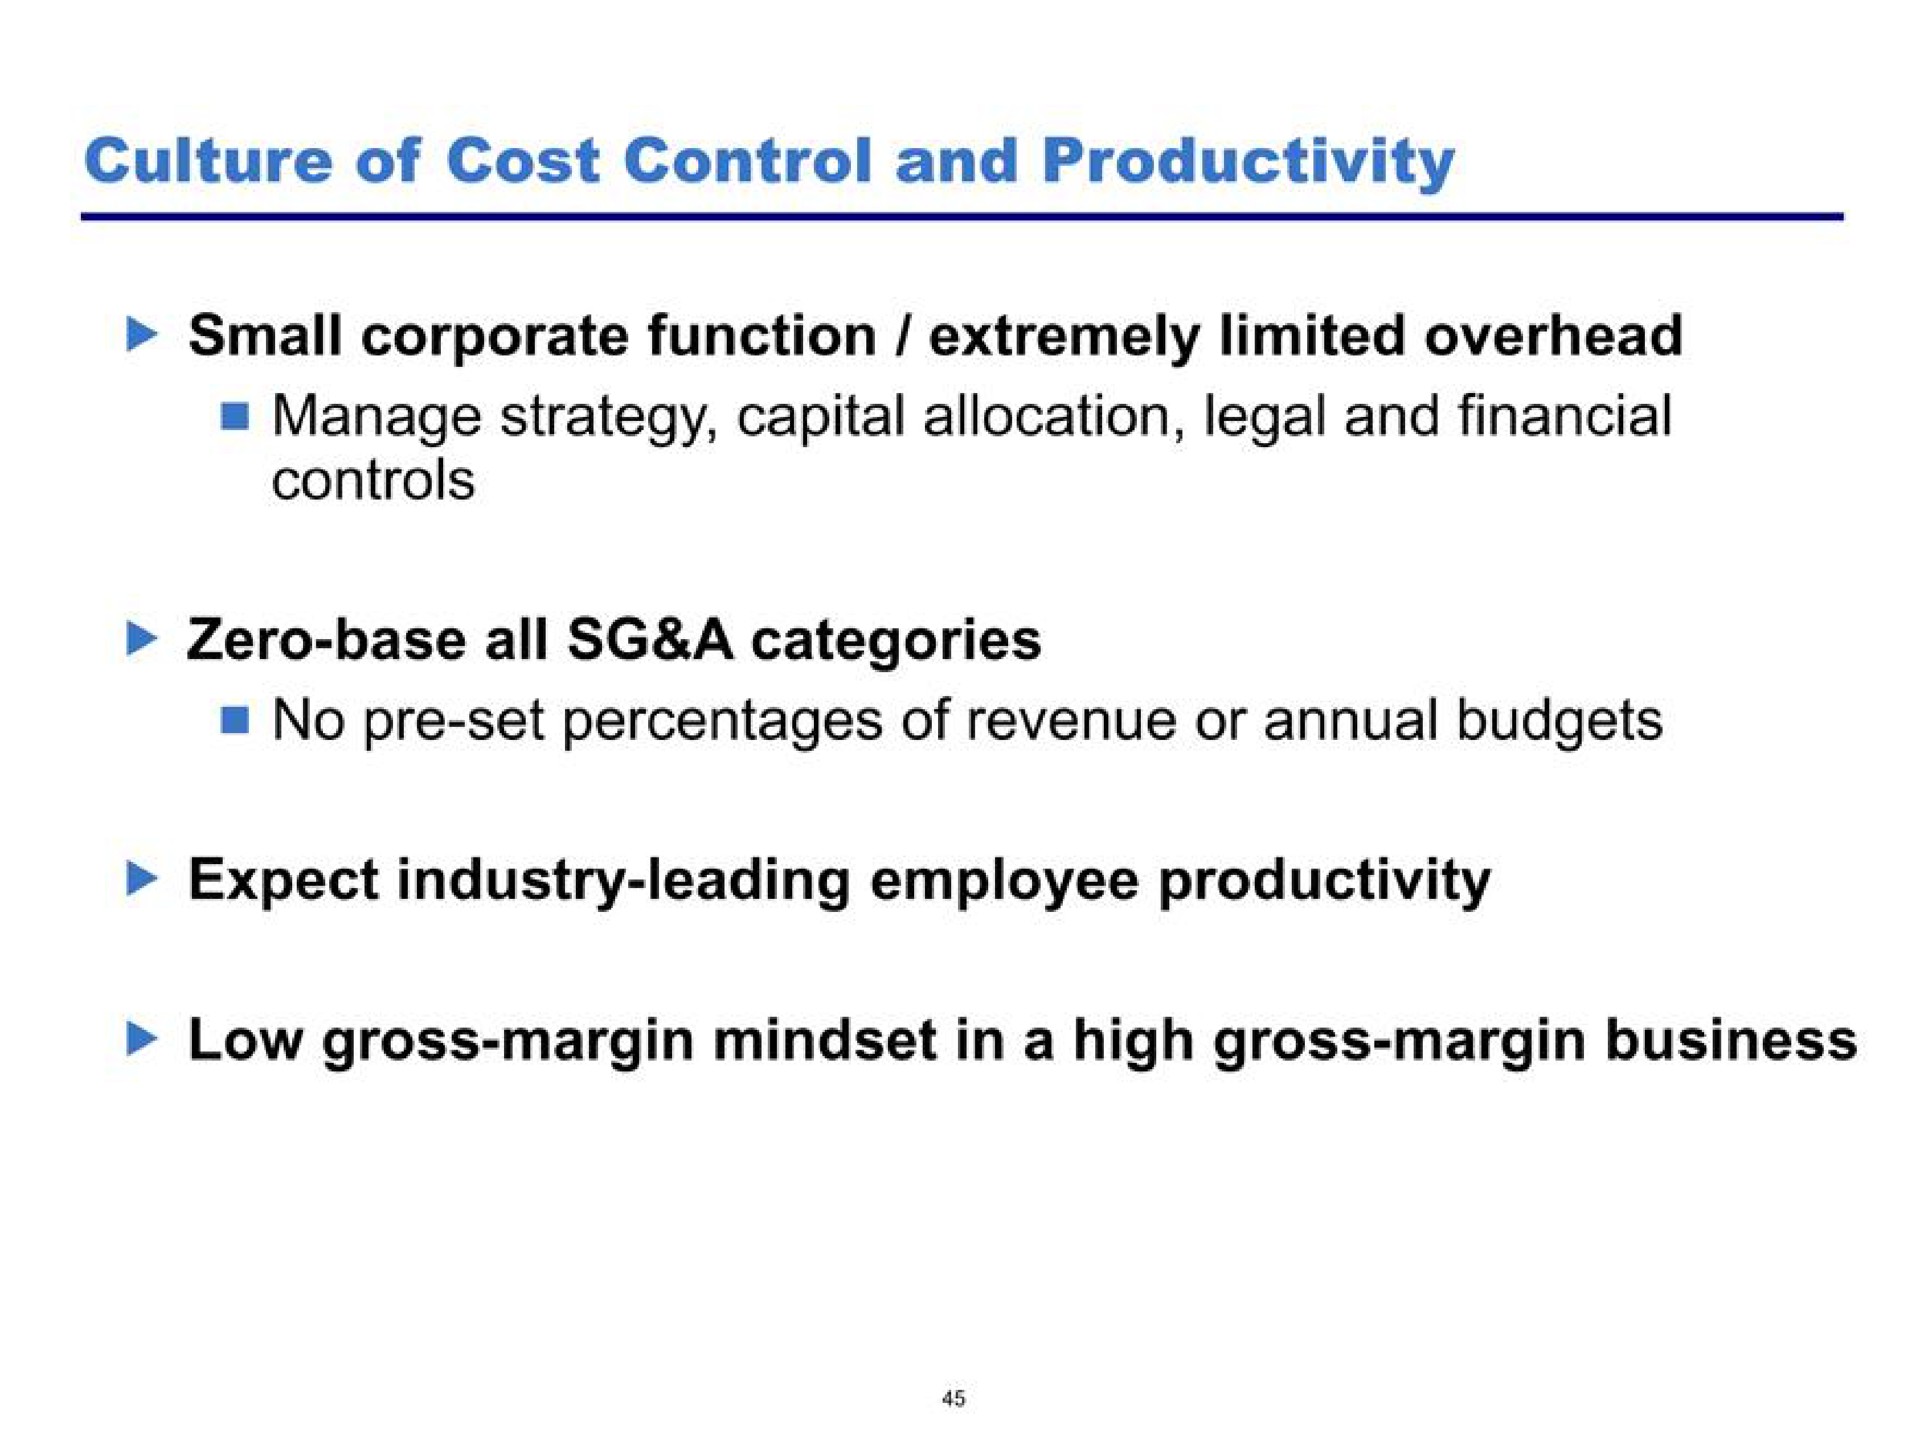 culture of cost control and productivity small corporate function extremely limited overhead zero base all a categories expect industry leading employee productivity low gross margin in a high gross margin business | Pershing Square